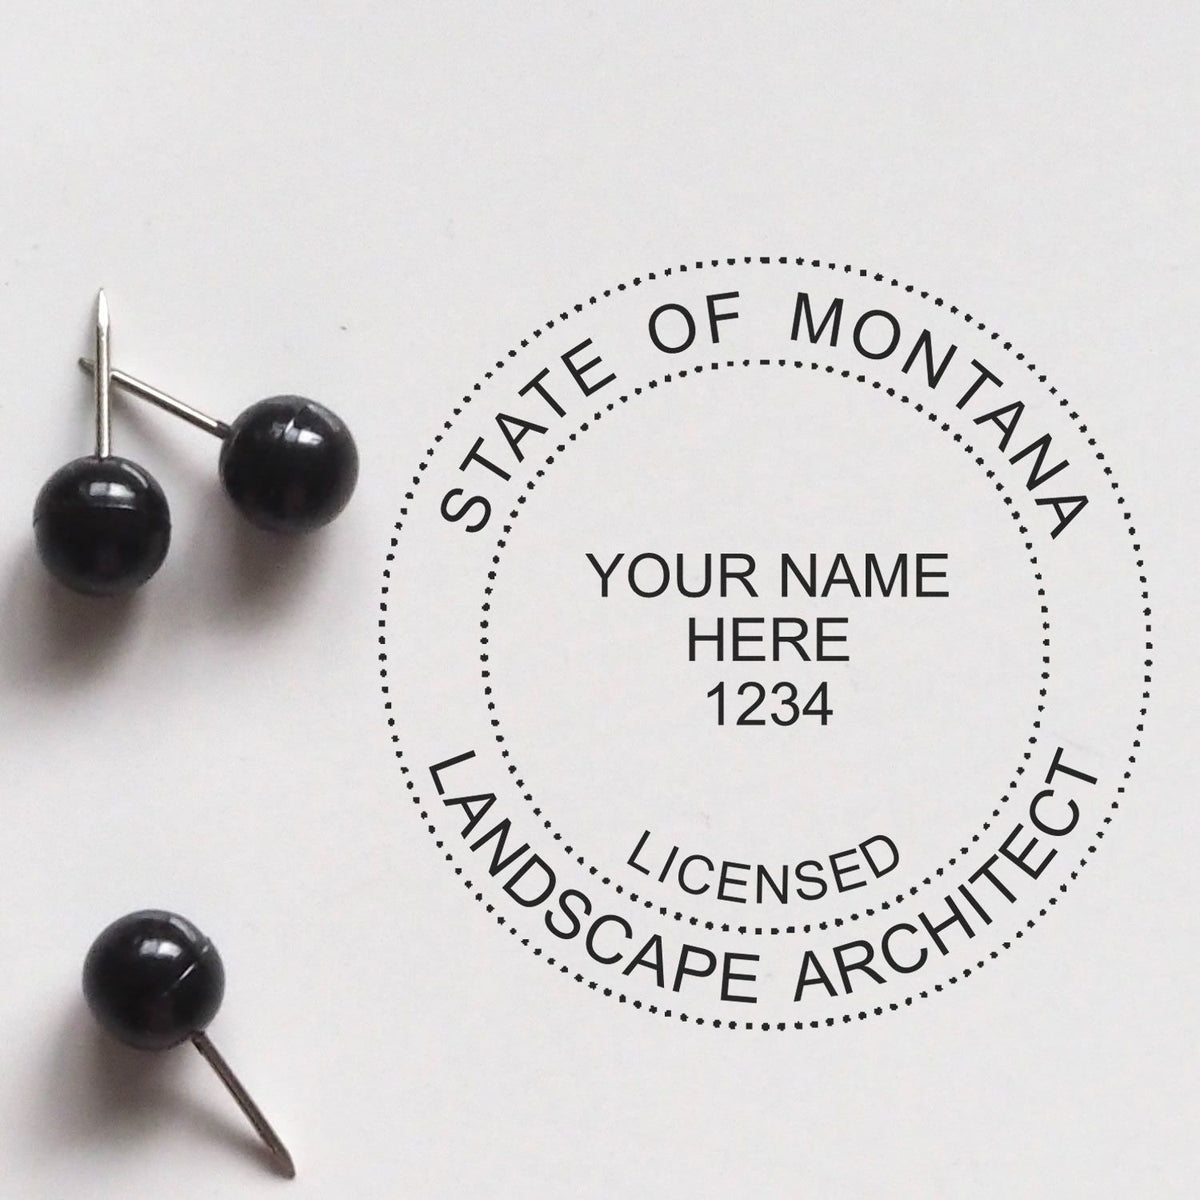 This paper is stamped with a sample imprint of the Montana Landscape Architectural Seal Stamp, signifying its quality and reliability.